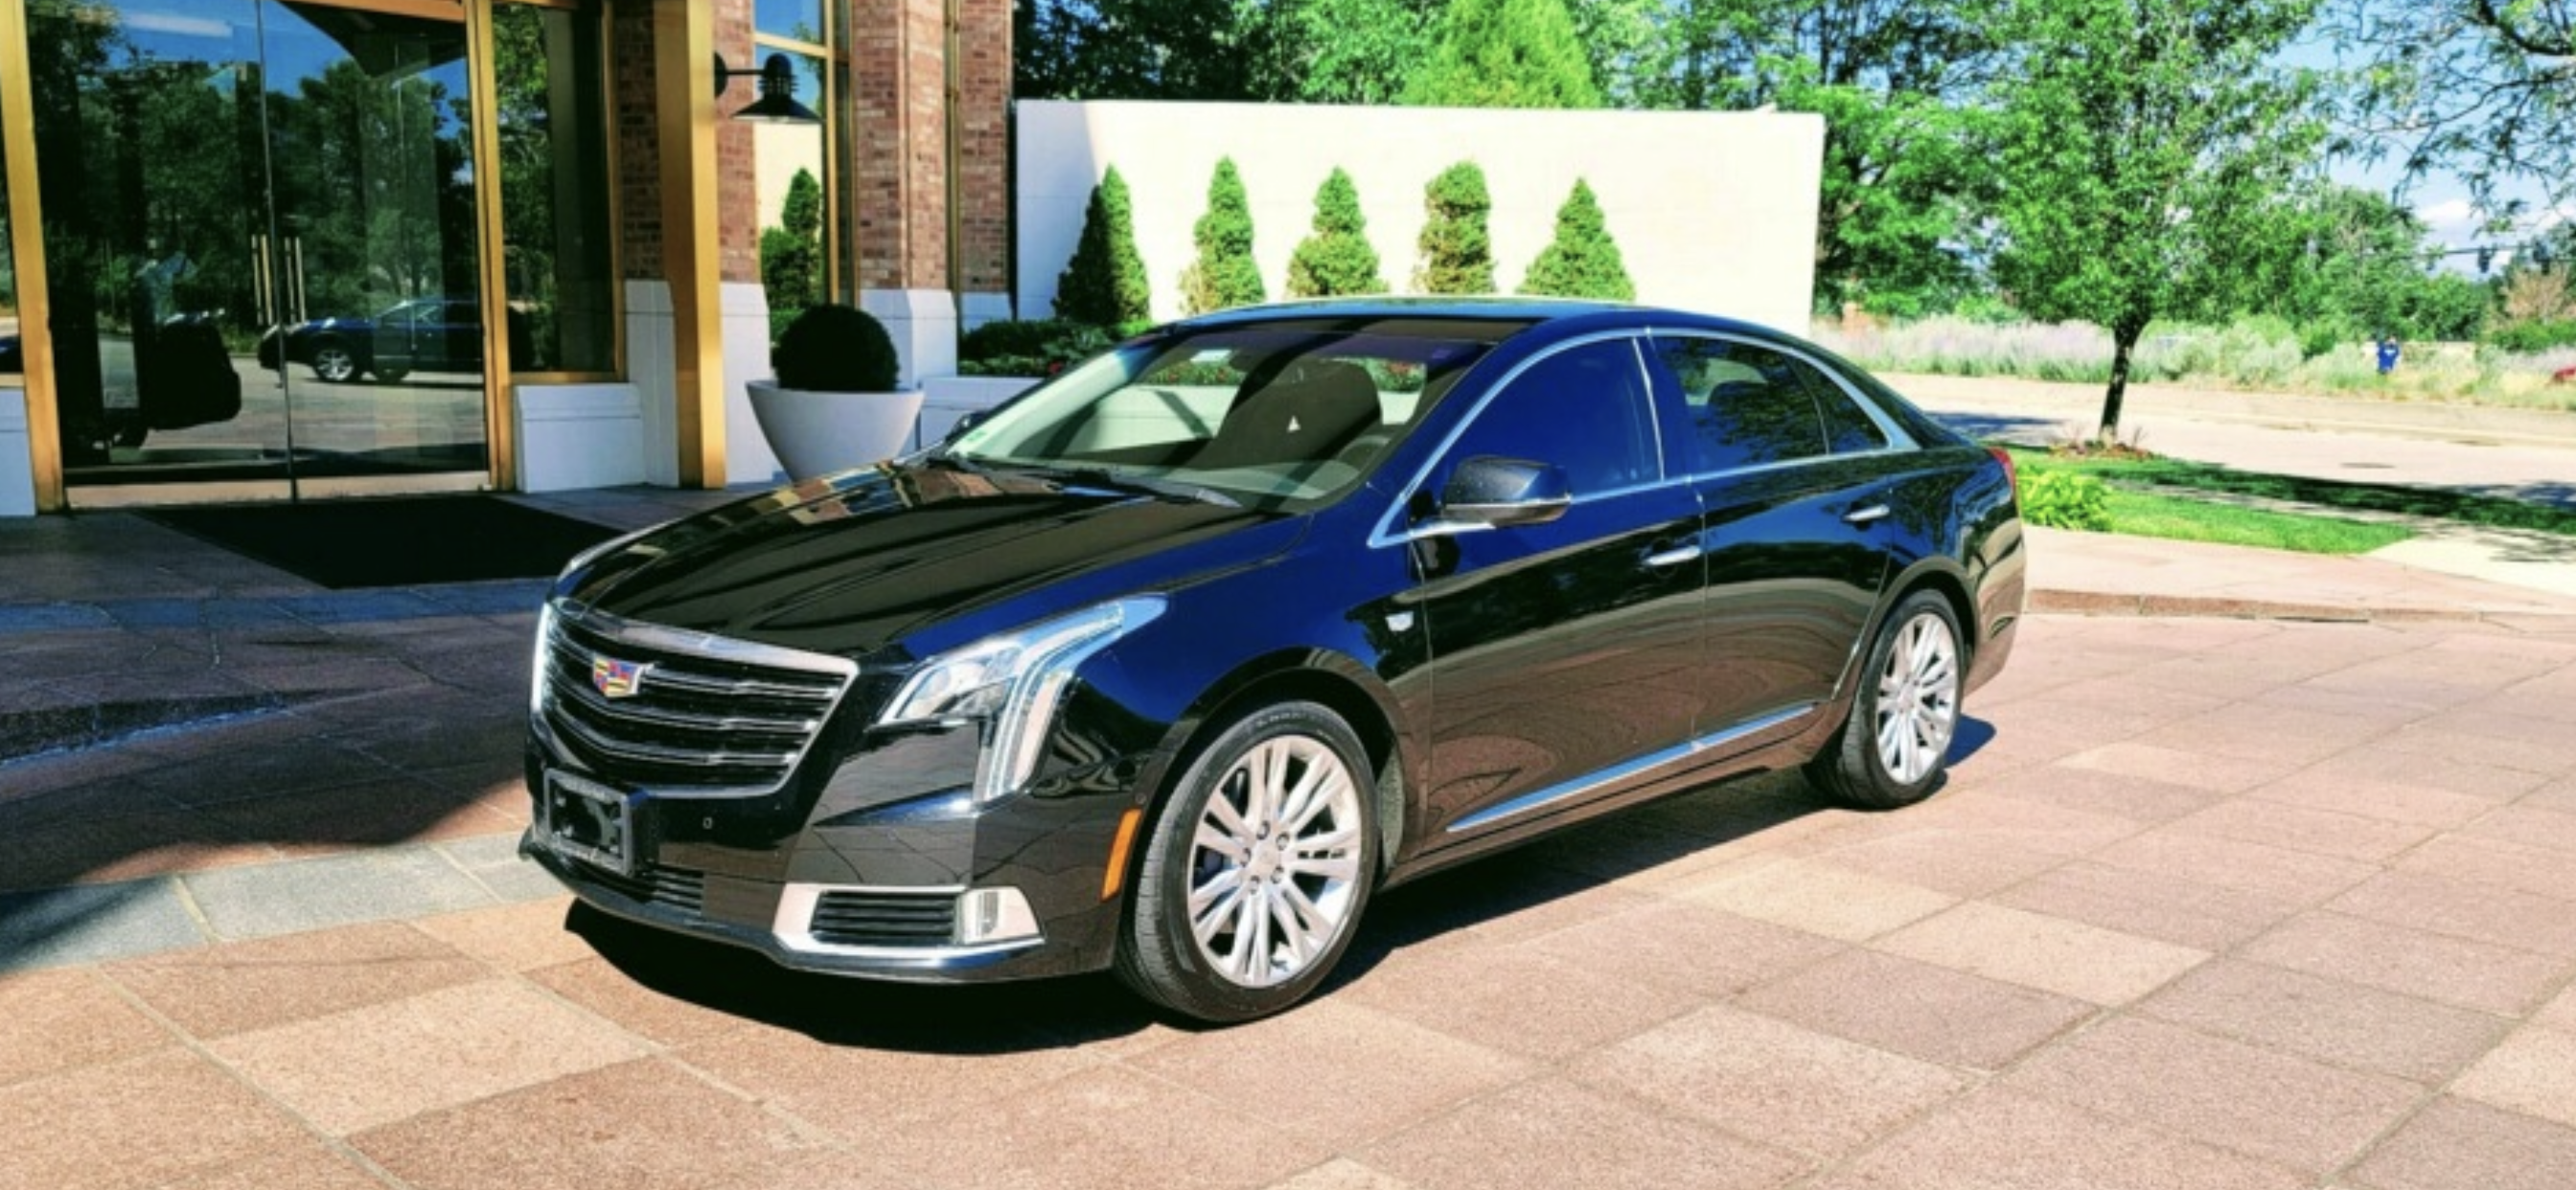 An image of a black cadillac XTS sedan. It's very reflective and looks great.